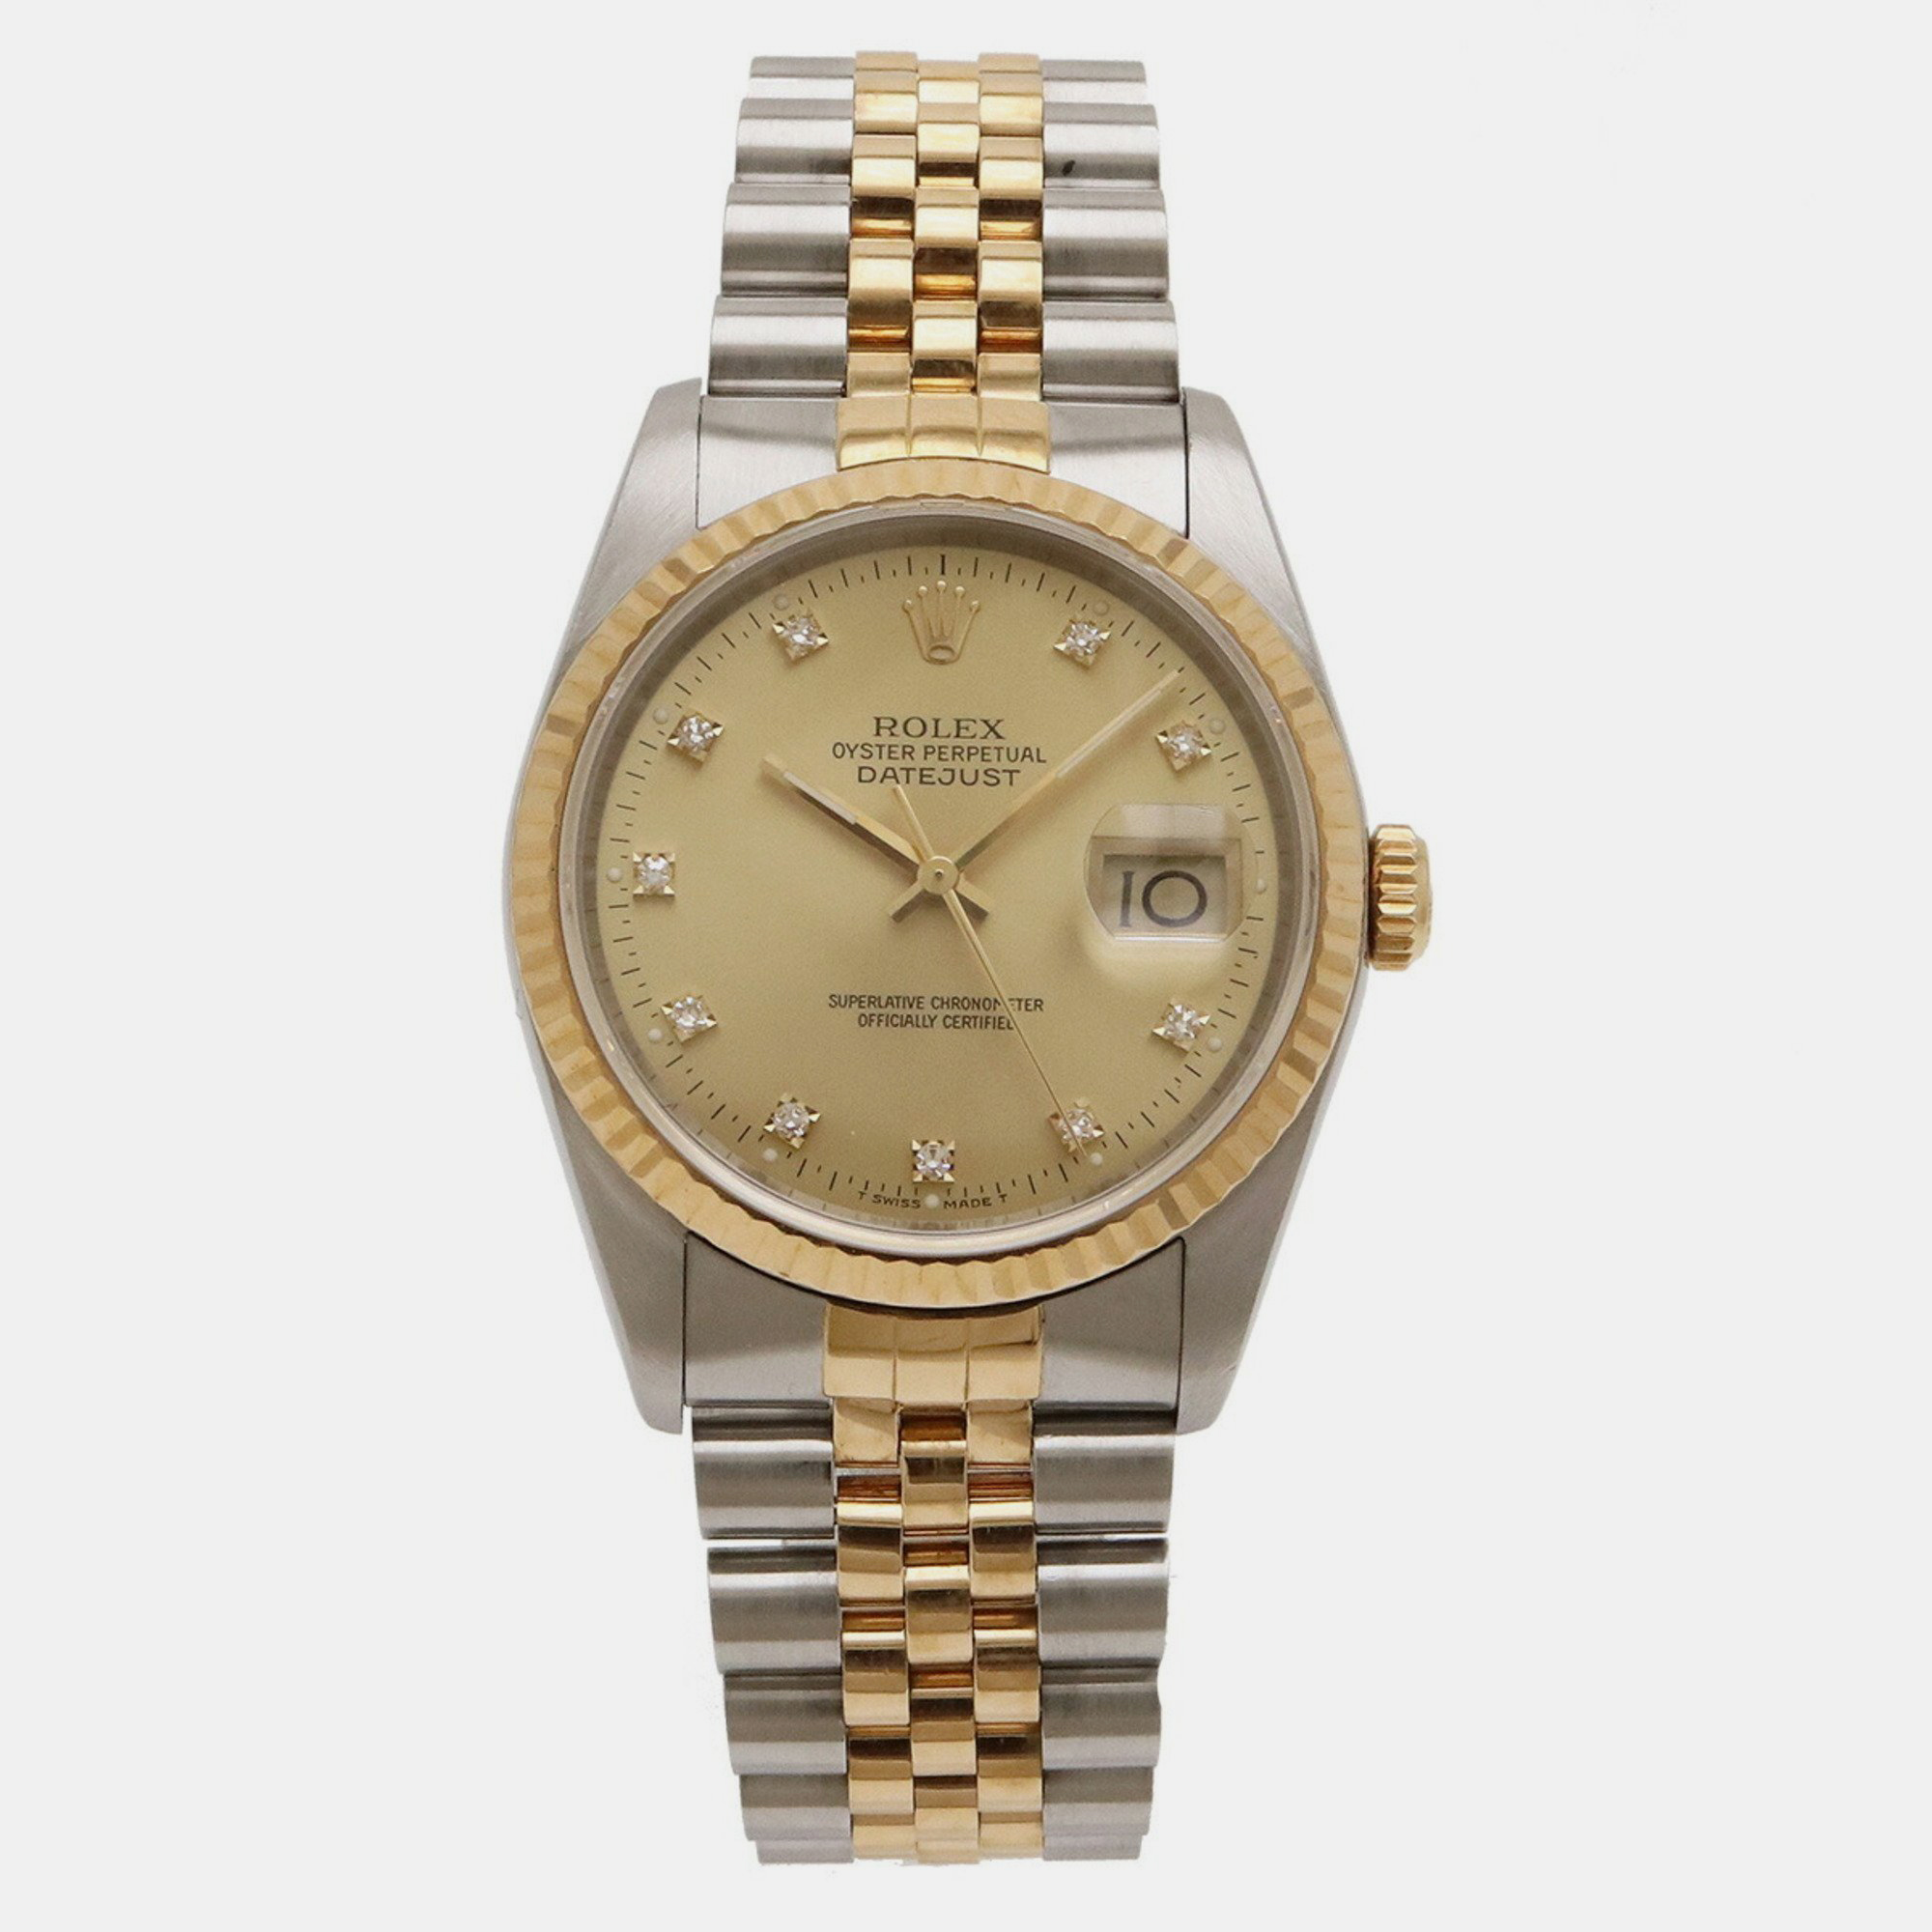 Pre-owned Rolex Champagne Diamond 18k Yellow Gold And Stainless Steel Datejust 16233 Automatic Men's Wristwatch 36 M